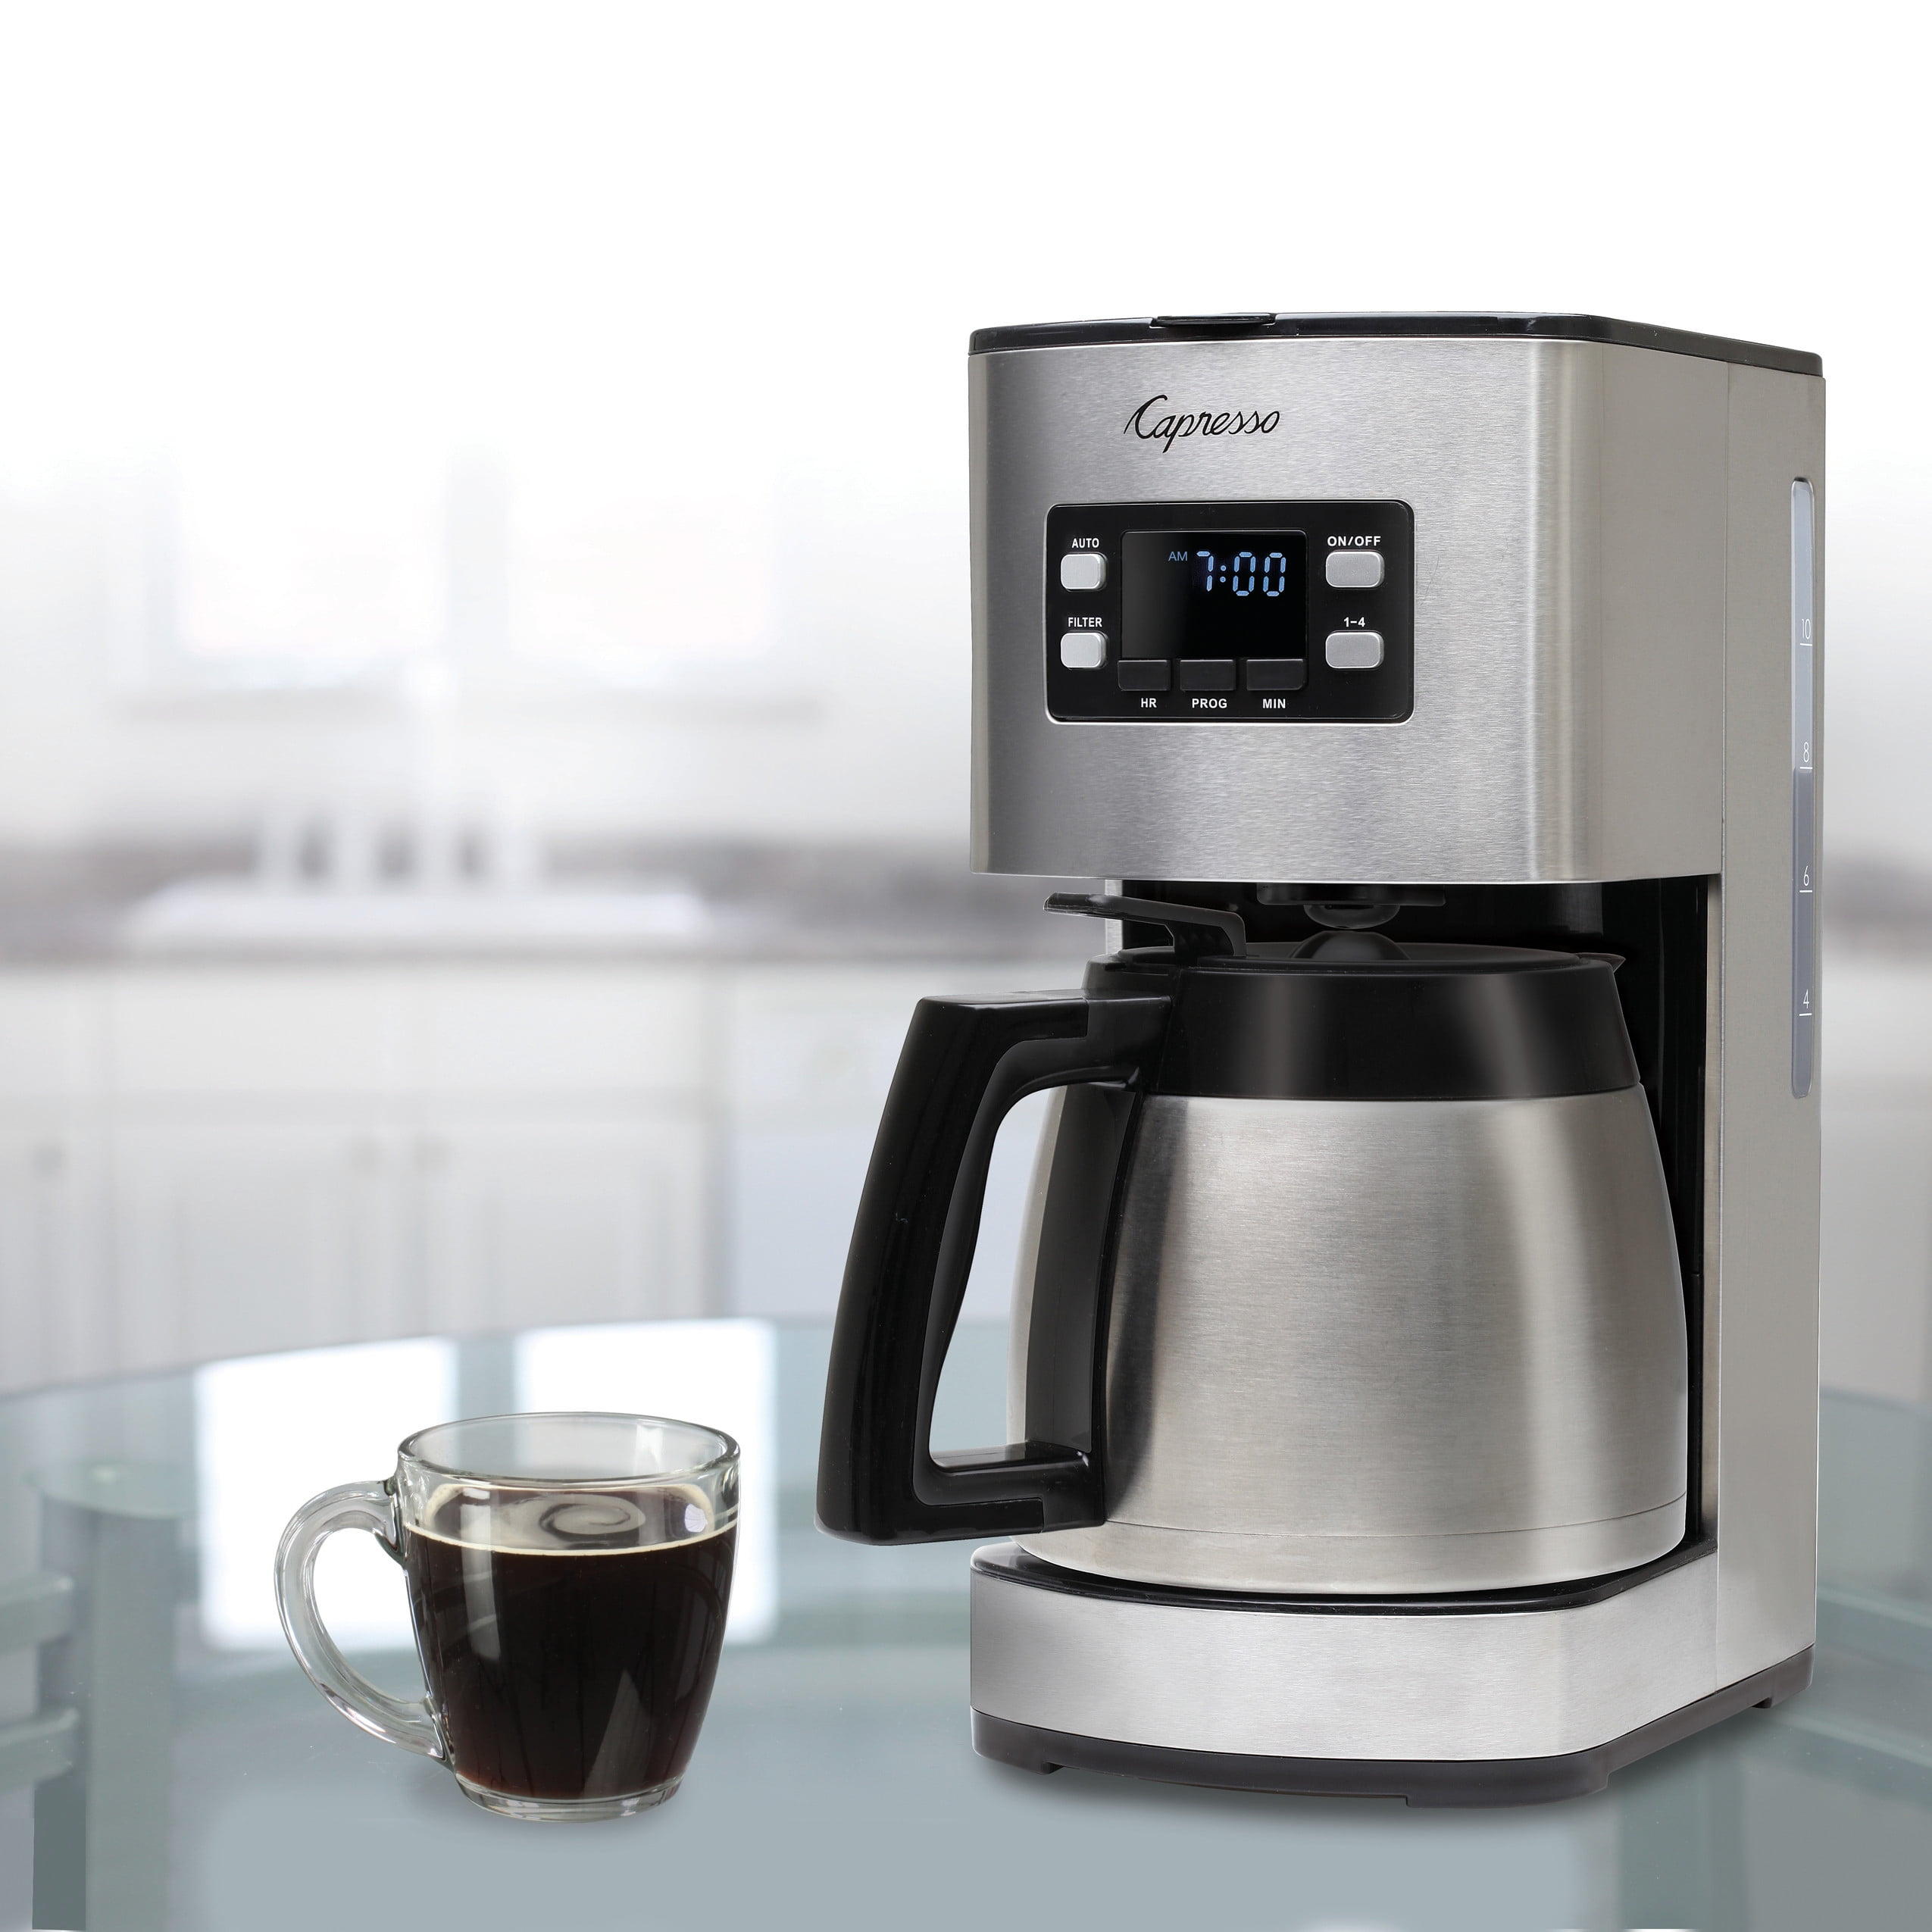 GE 10-Cup Stainless Steel Drip Coffee Maker with Thermal Carafe